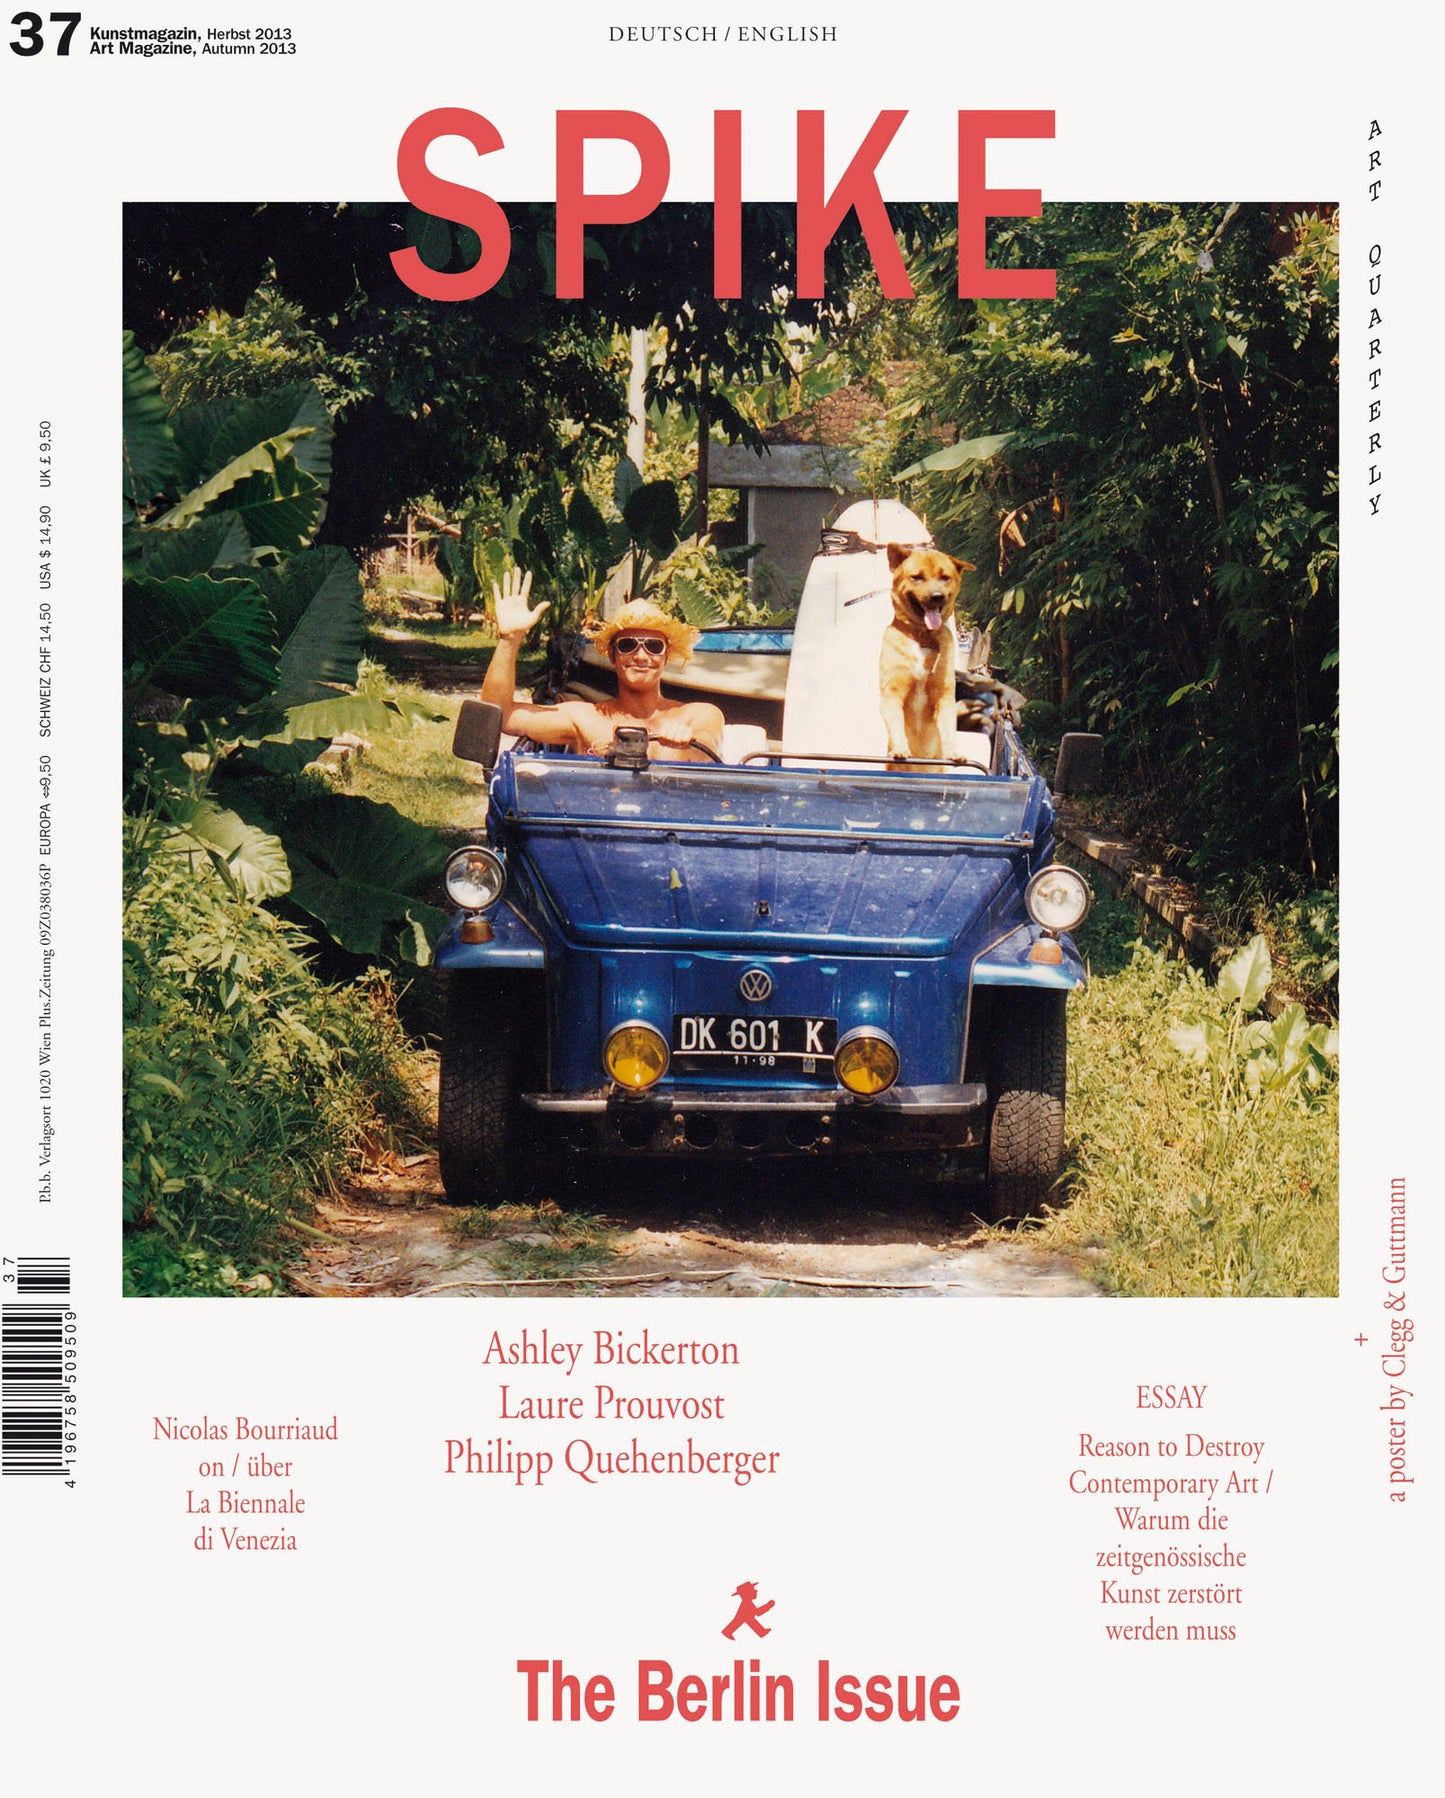 ISSUE 37 (AUTUMN 2013): The Berlin Issue